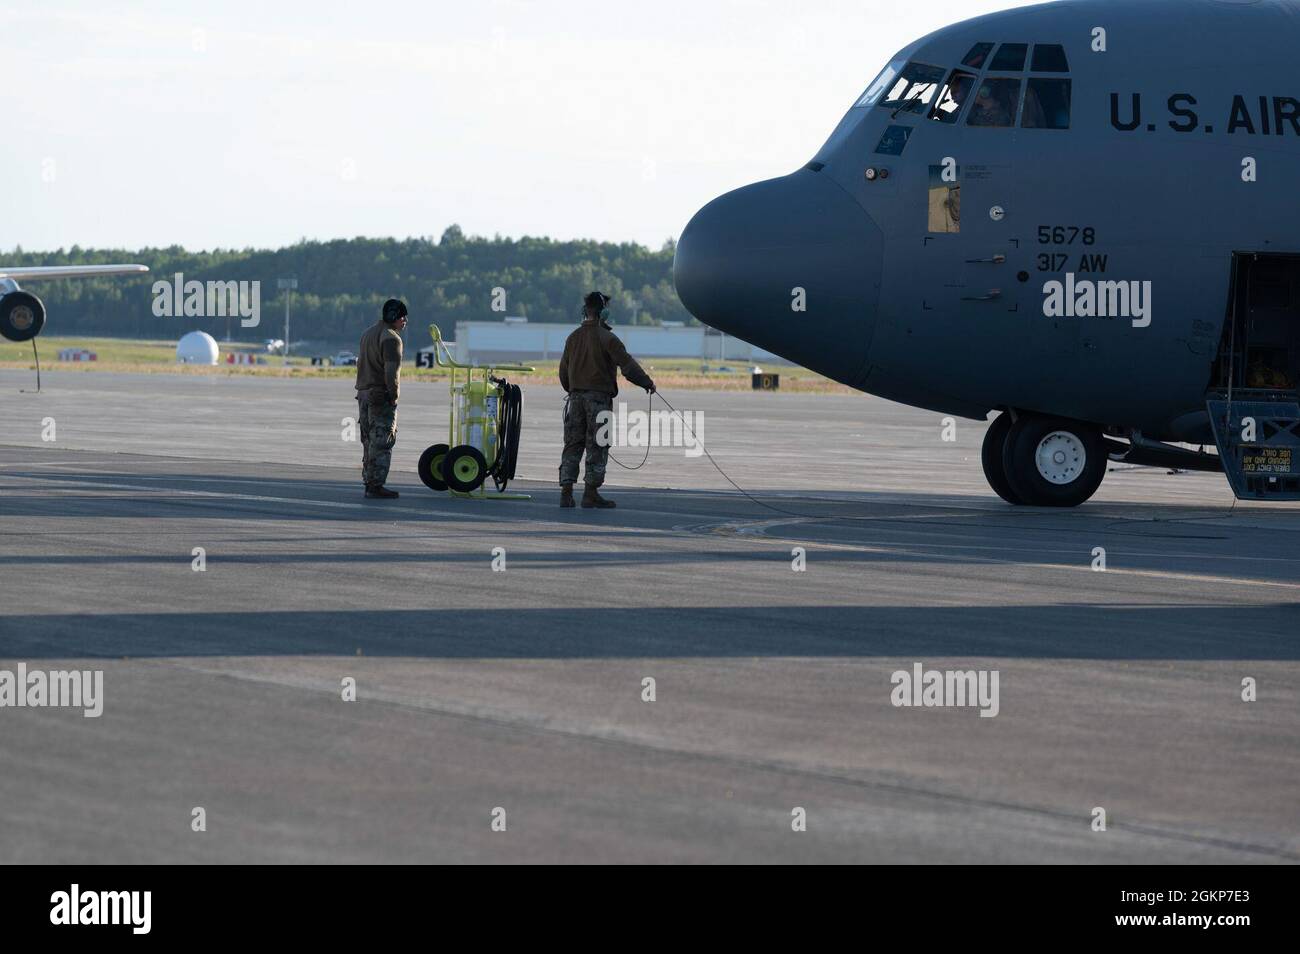 U.S. Air Force Senior Airman Rigoberto Villanueva and Airman 1st Class Jake Jardina perform pre-flight inspections during RED FLAG-Alaska 21-2 at Joint Base Elmendorf-Richardson, Alaska, June 11, 2021. Approximately 1,500 service members are expected to fly, maintain and support more than 100 aircraft from more than 100 units during this iteration of the exercise. Villanueva and Jardina are both C-130J Super Hercules crew chief  assigned to the 317th Maintenance Squadron, Dyess Air Force Base, Texas. Stock Photo